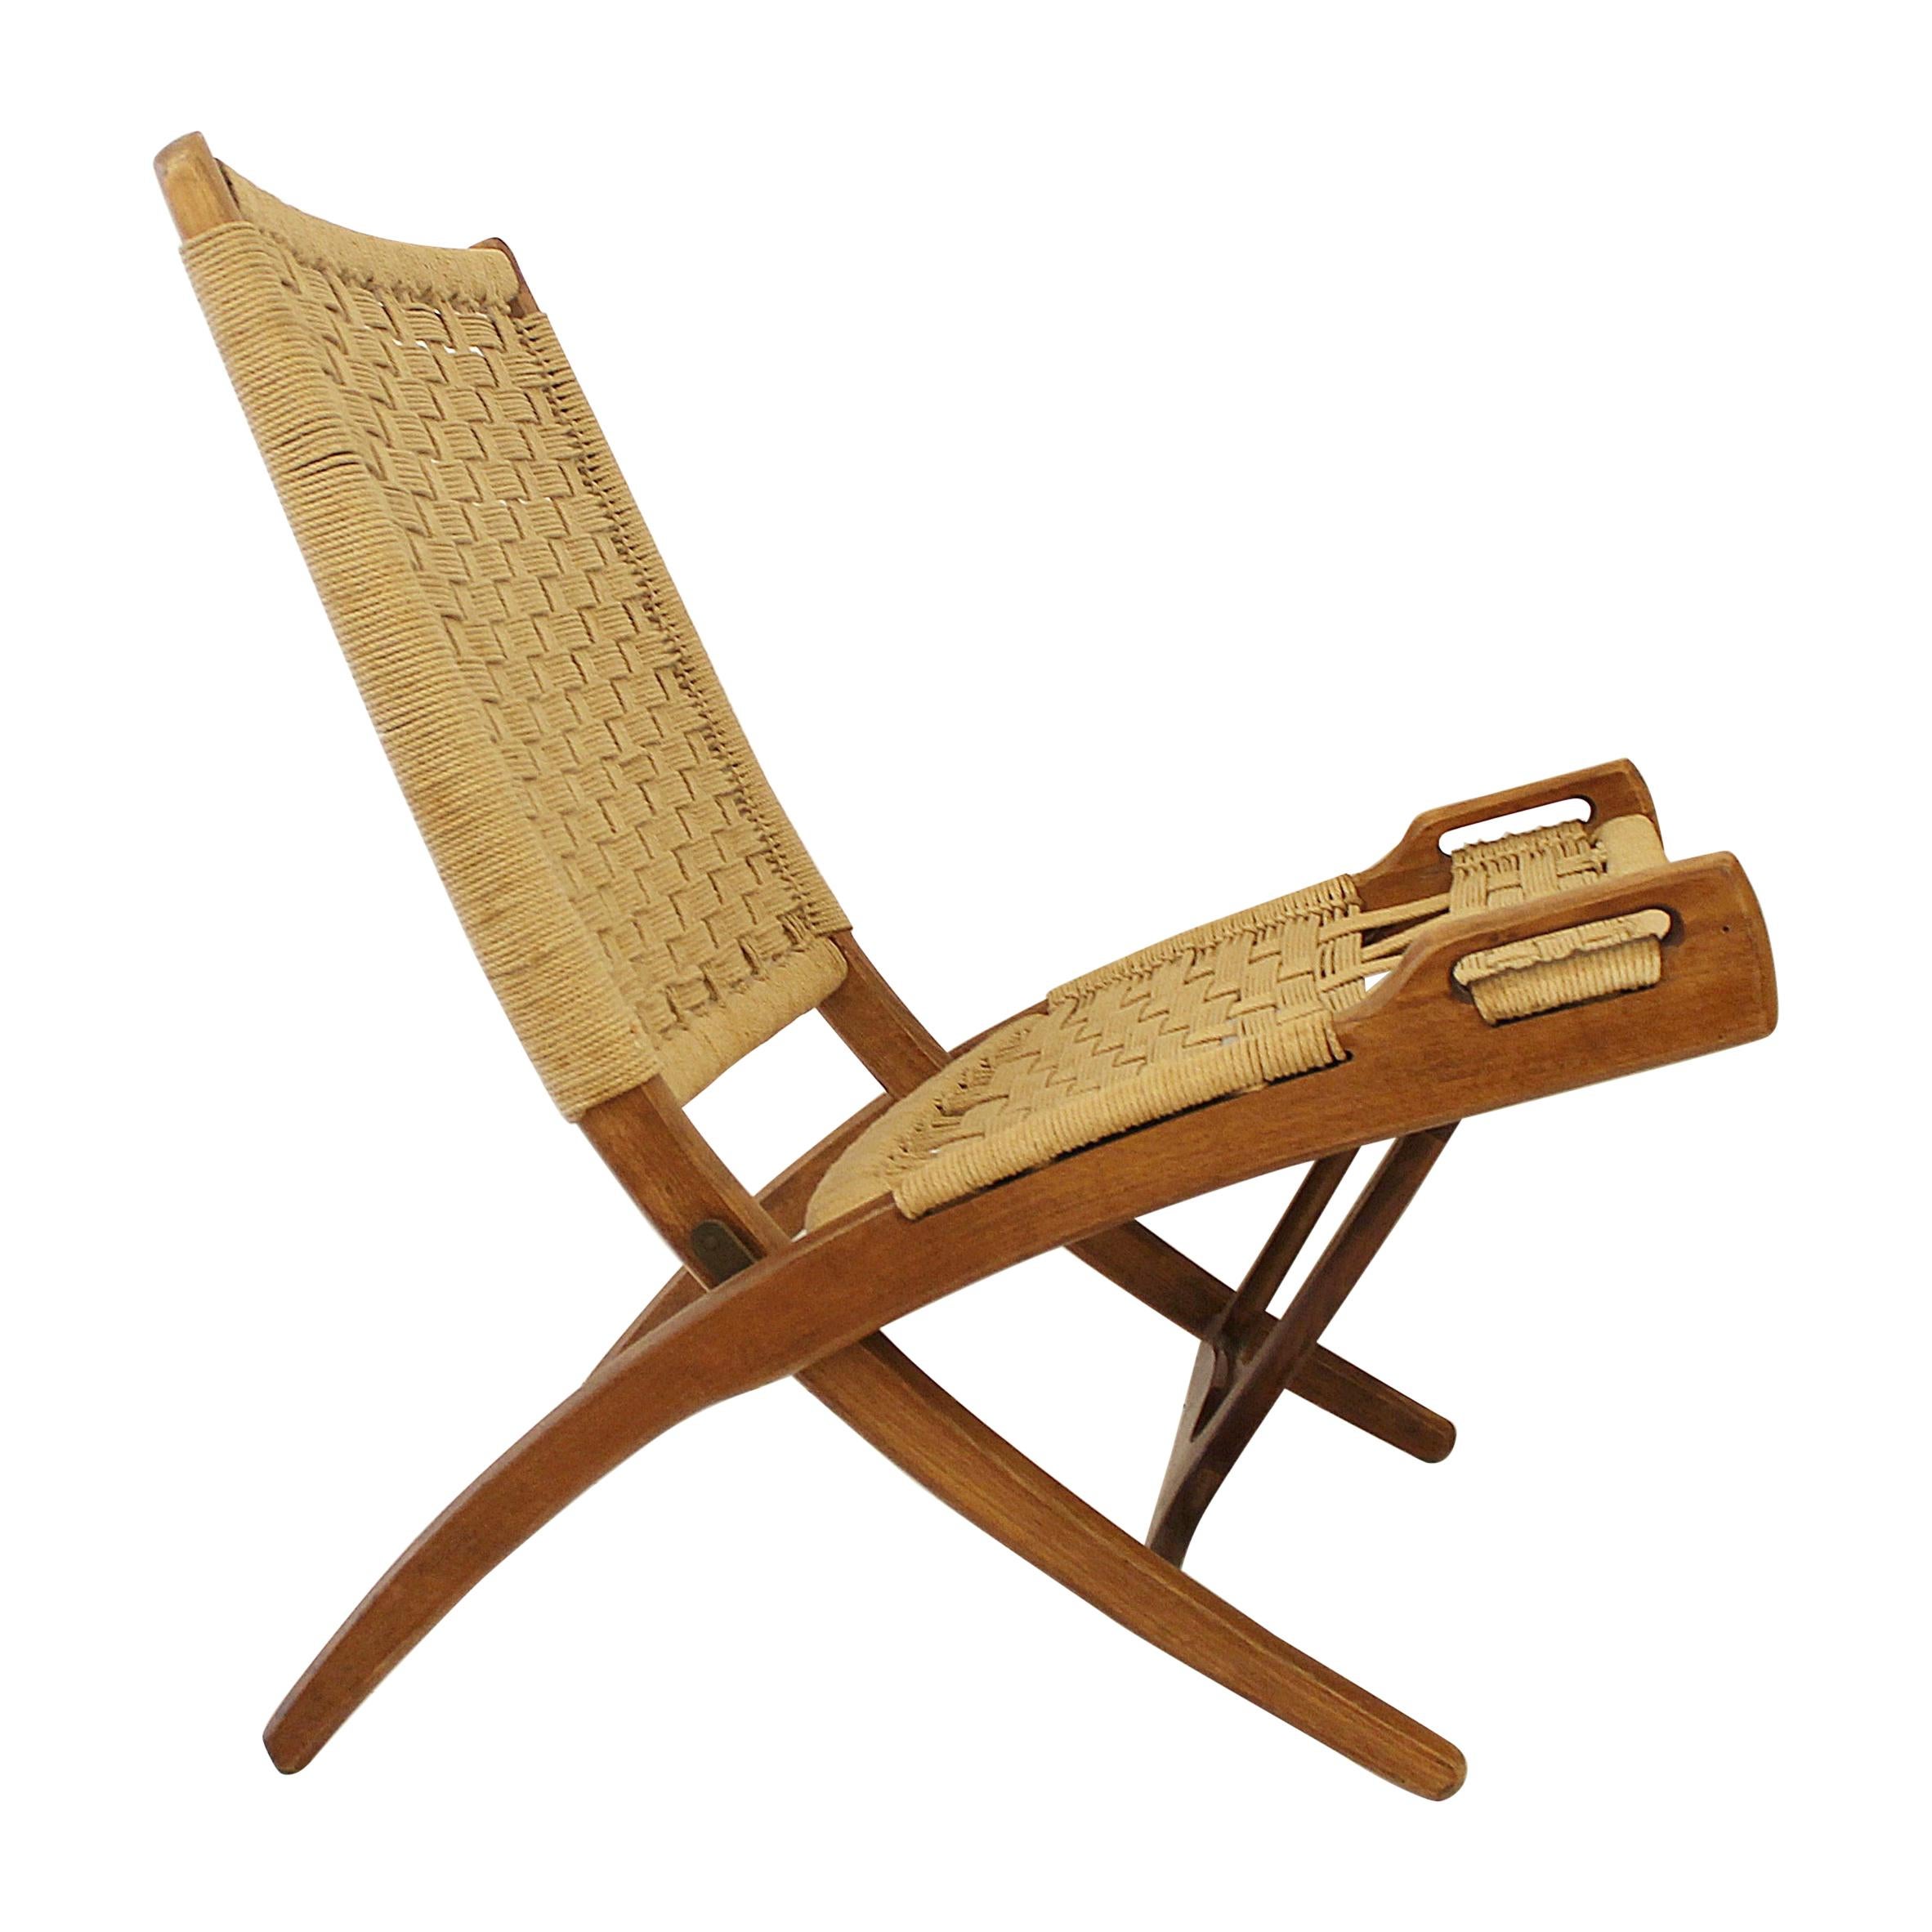 Pair of foldable Armchair in Wood and Rope in Style of Gio Ponti